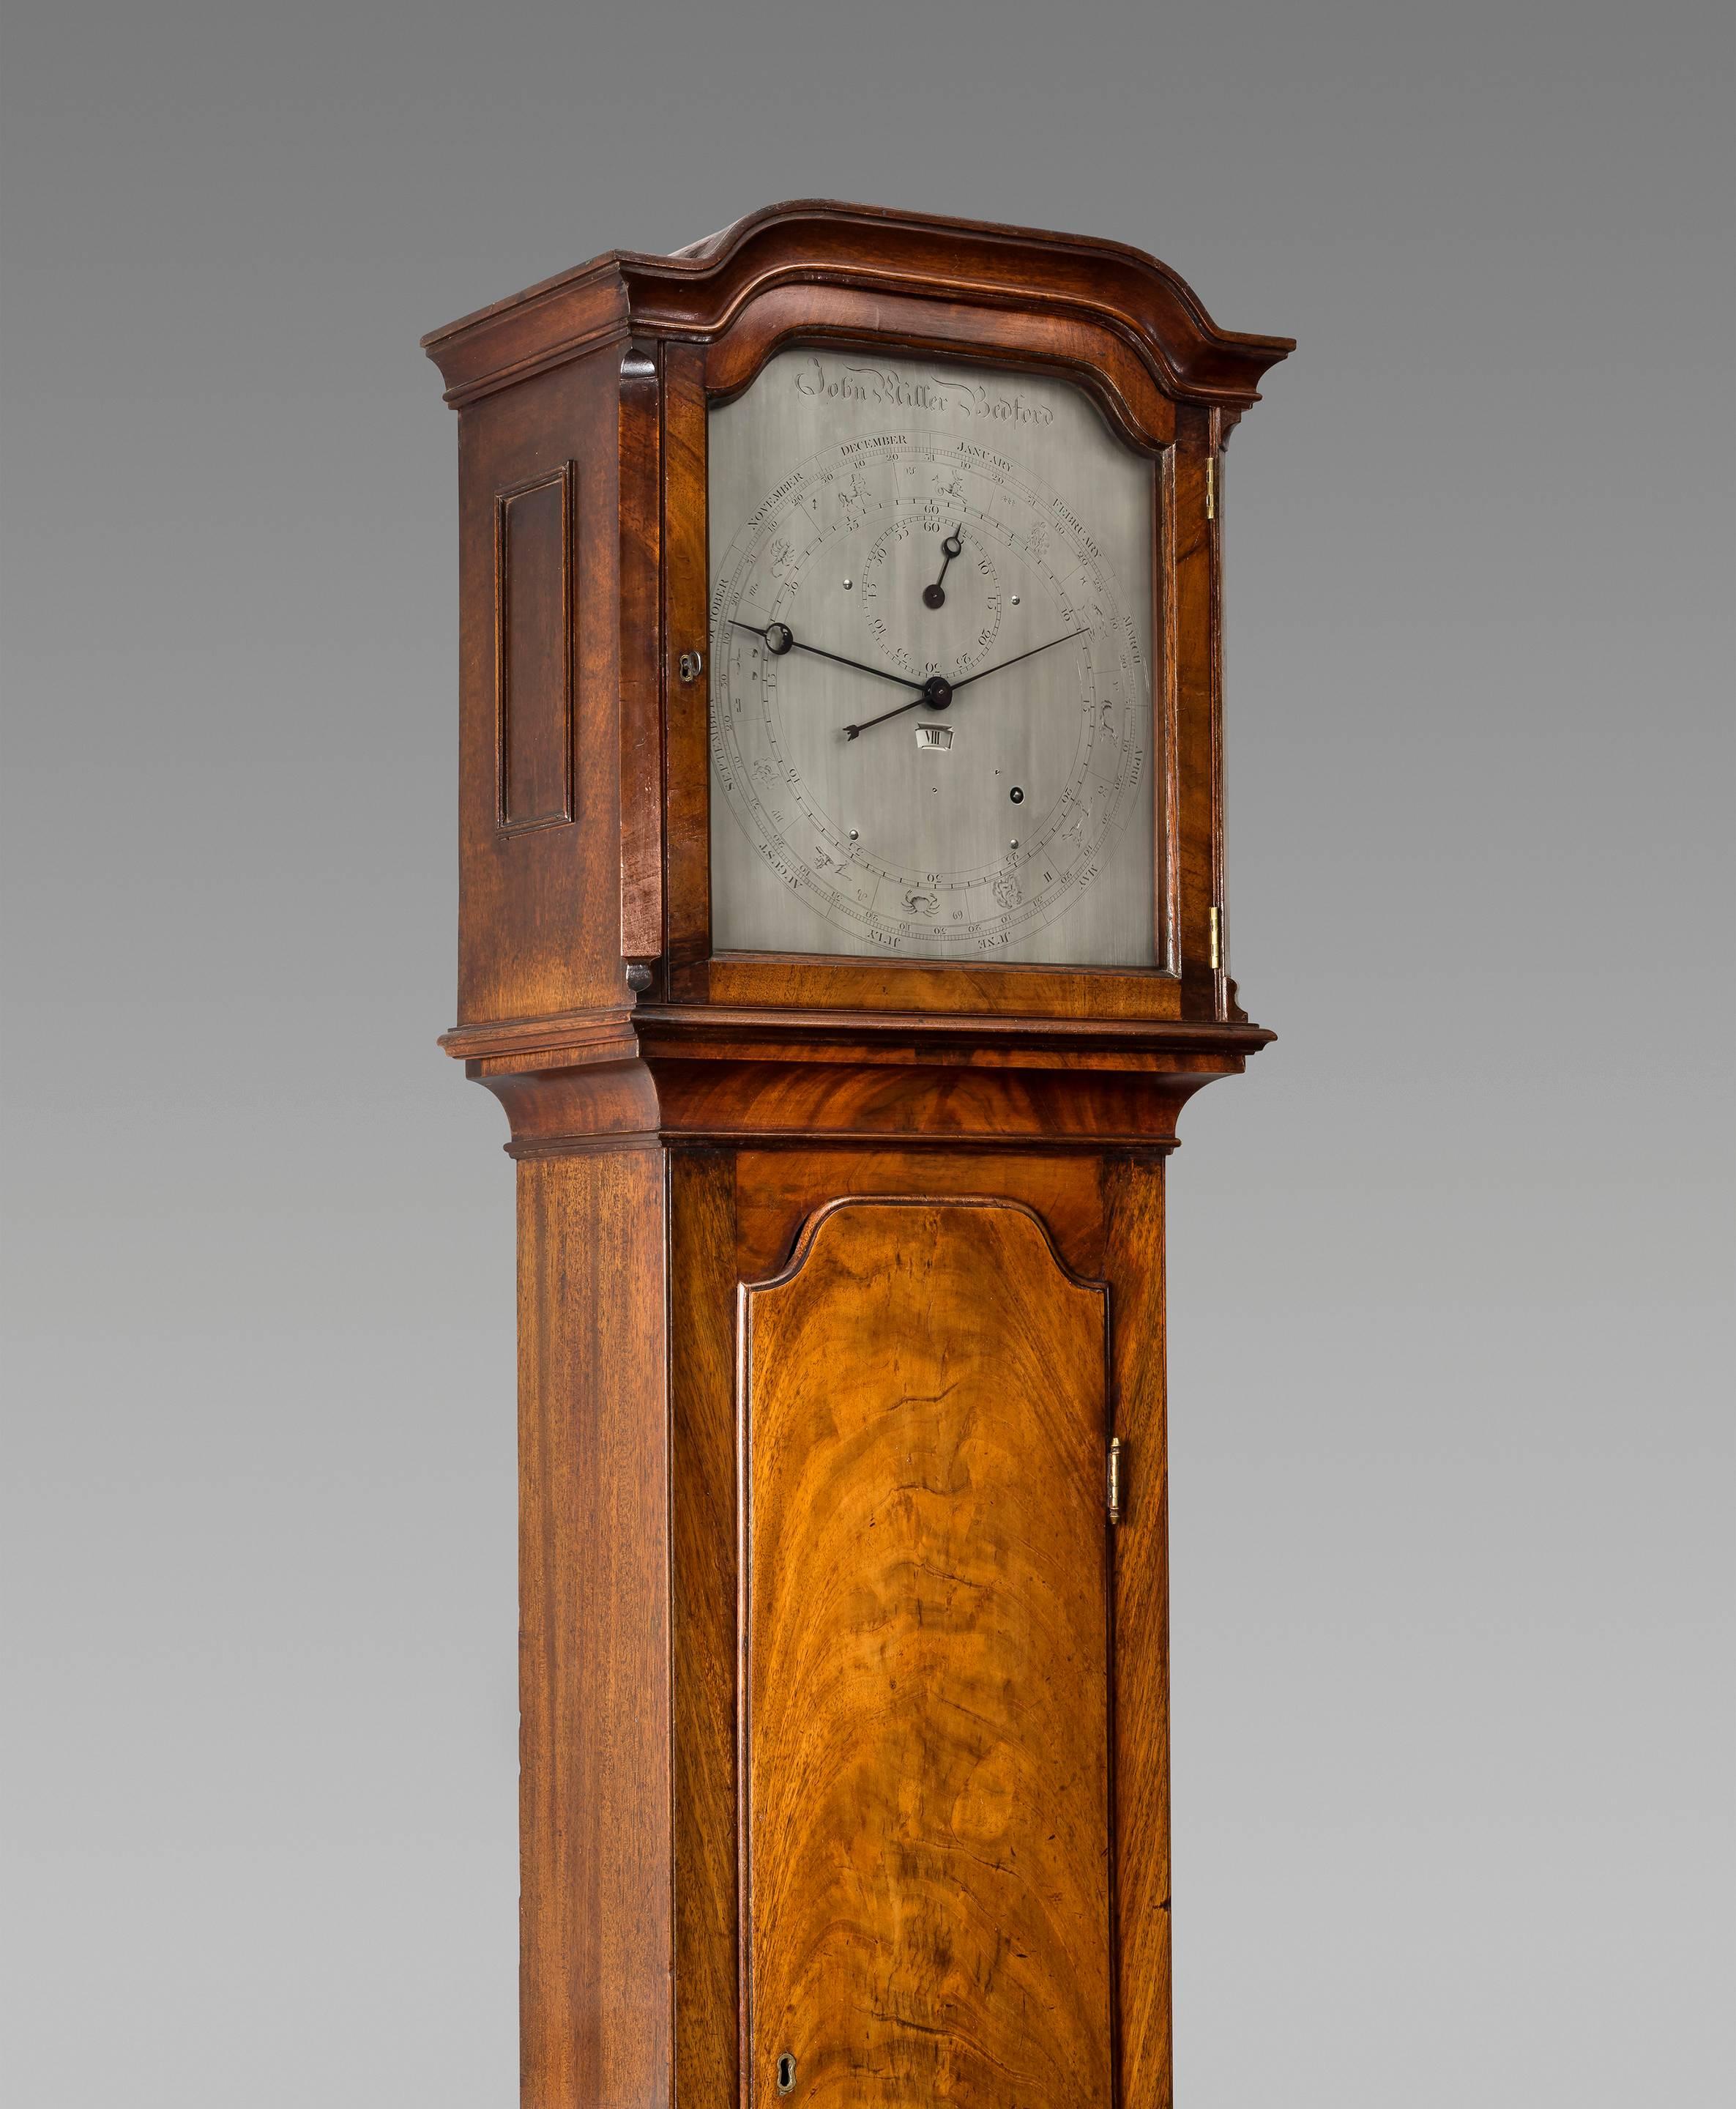 A fine English Regency mahogany regulator longcase, the beautiful flame veneered case with shallow arch and ogee moulded hood. The 12 inch ogee shaped silvered dial is of the regulator type with separate dials for hours, minutes and seconds. It also